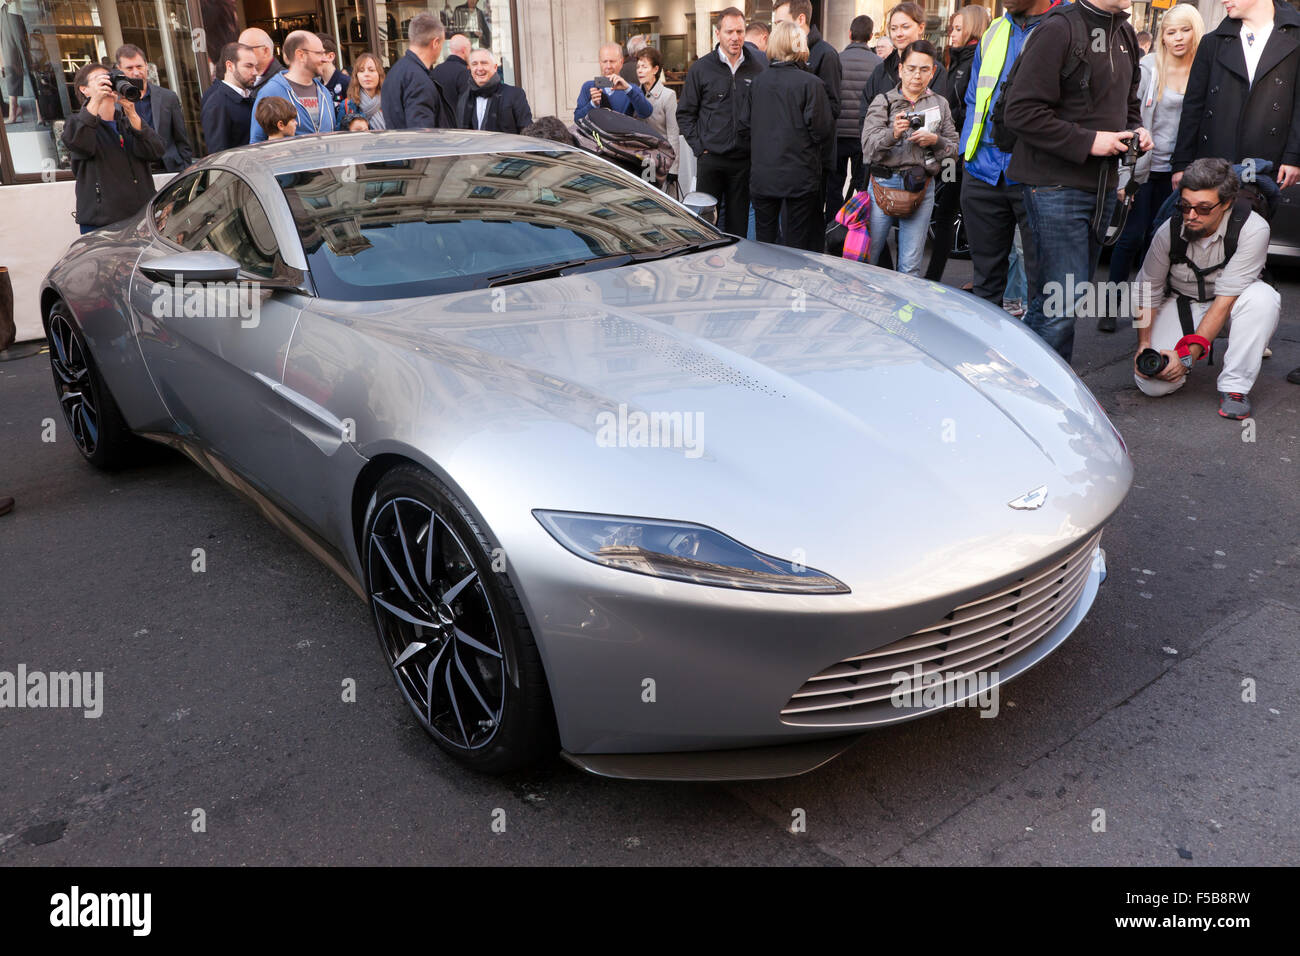 The Aston Martin DB10, from the new James Bond Film 